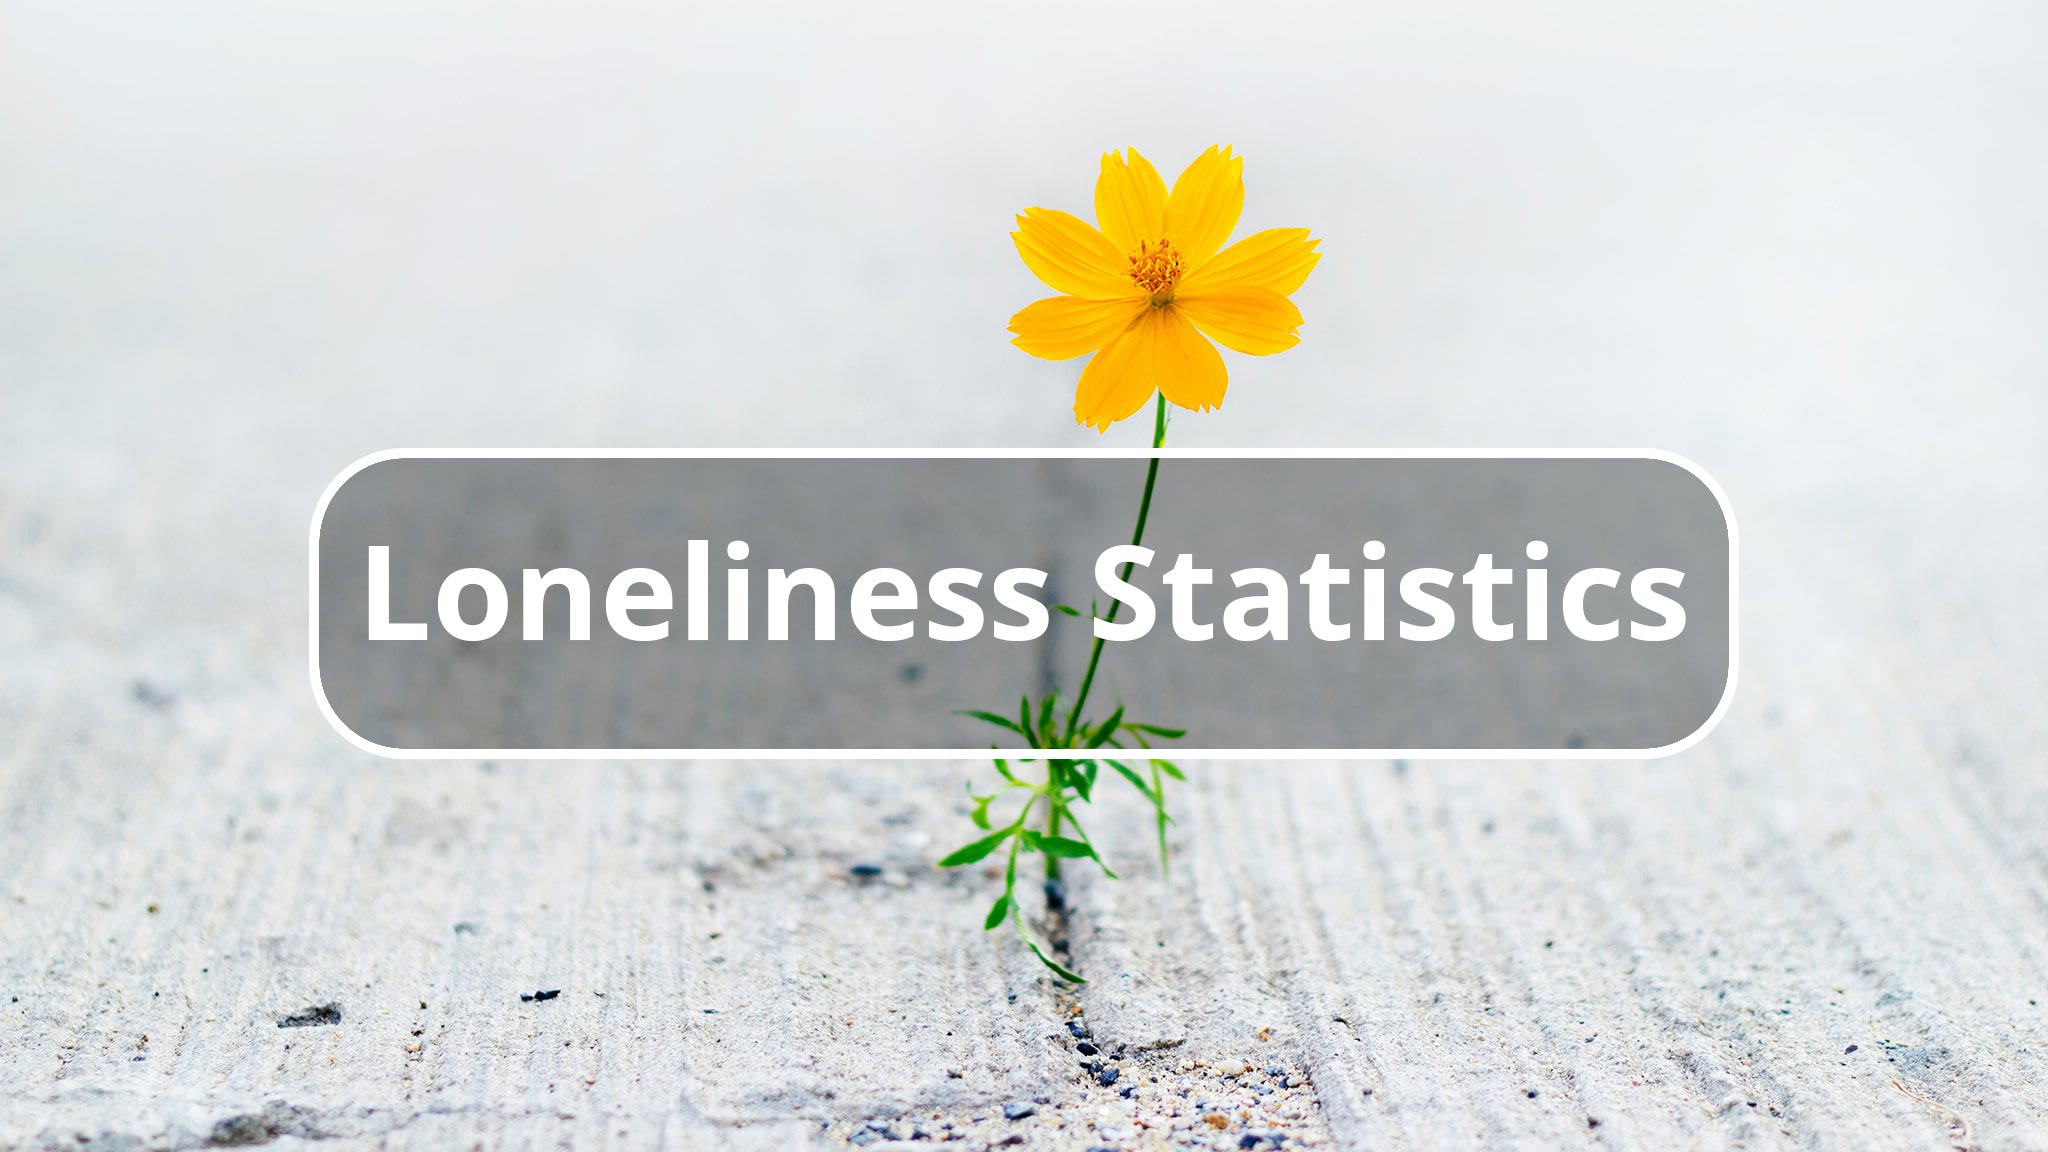 Yellow Flower Growing Up Through Sidewalk Crack With "Loneliness Statistics" Text